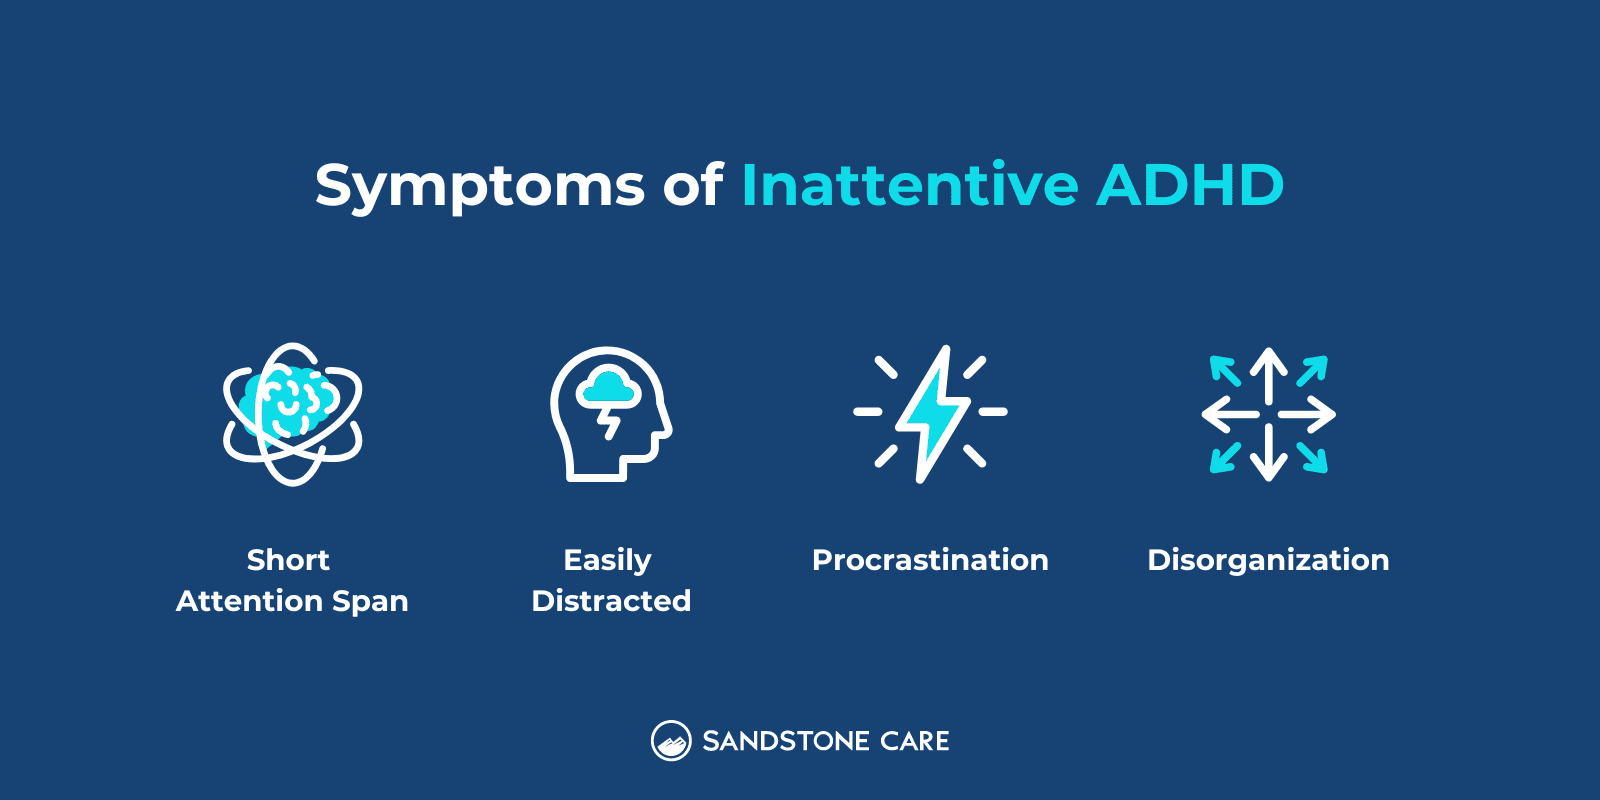 A List of Symptoms Of Inattentive ADHD illustrated with relevant icons